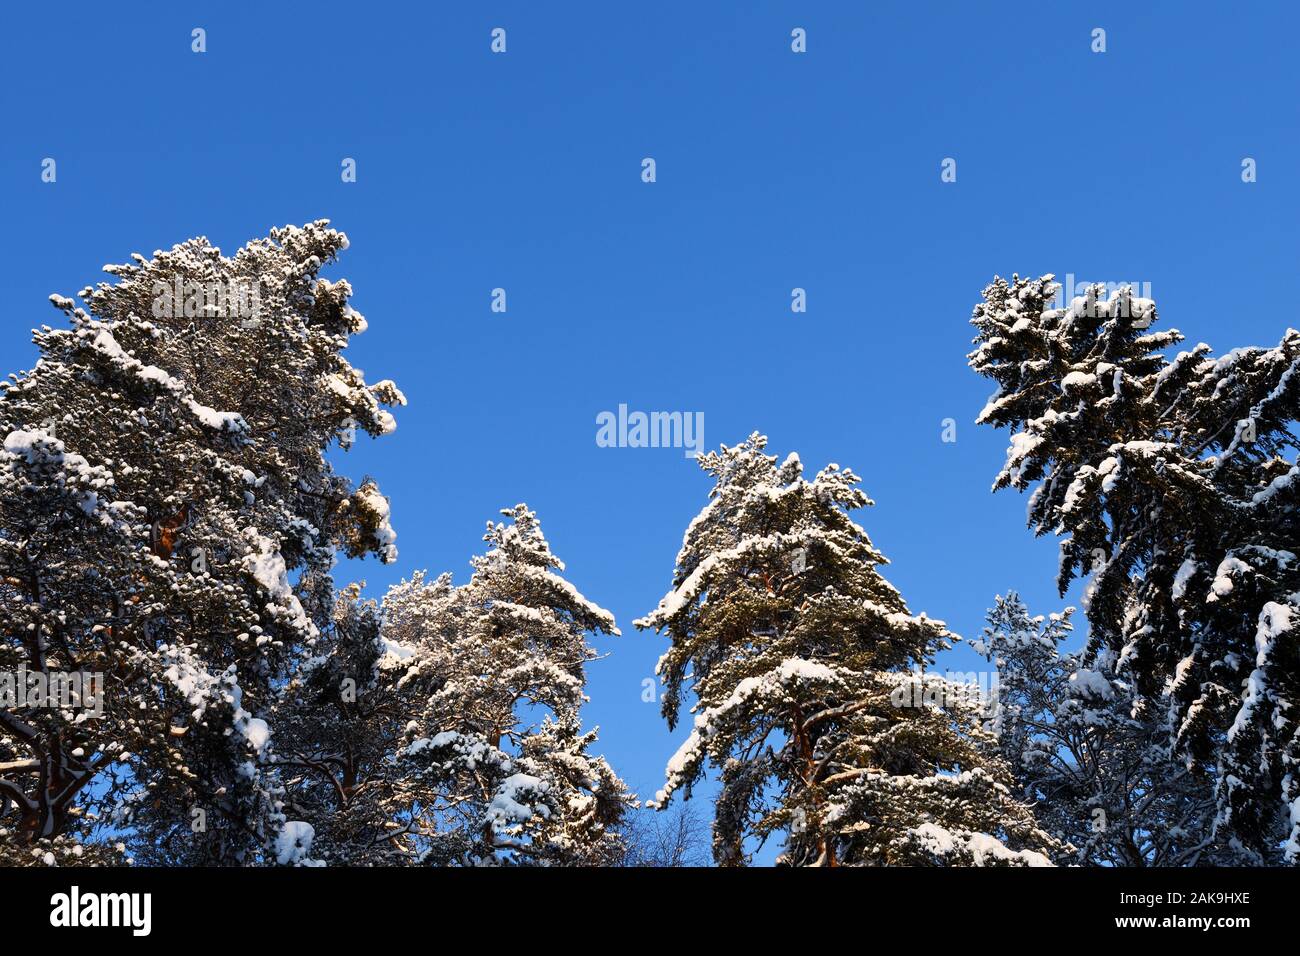 Winter forest, tall spruce and pine trees covered with snow against clear blue sky Stock Photo